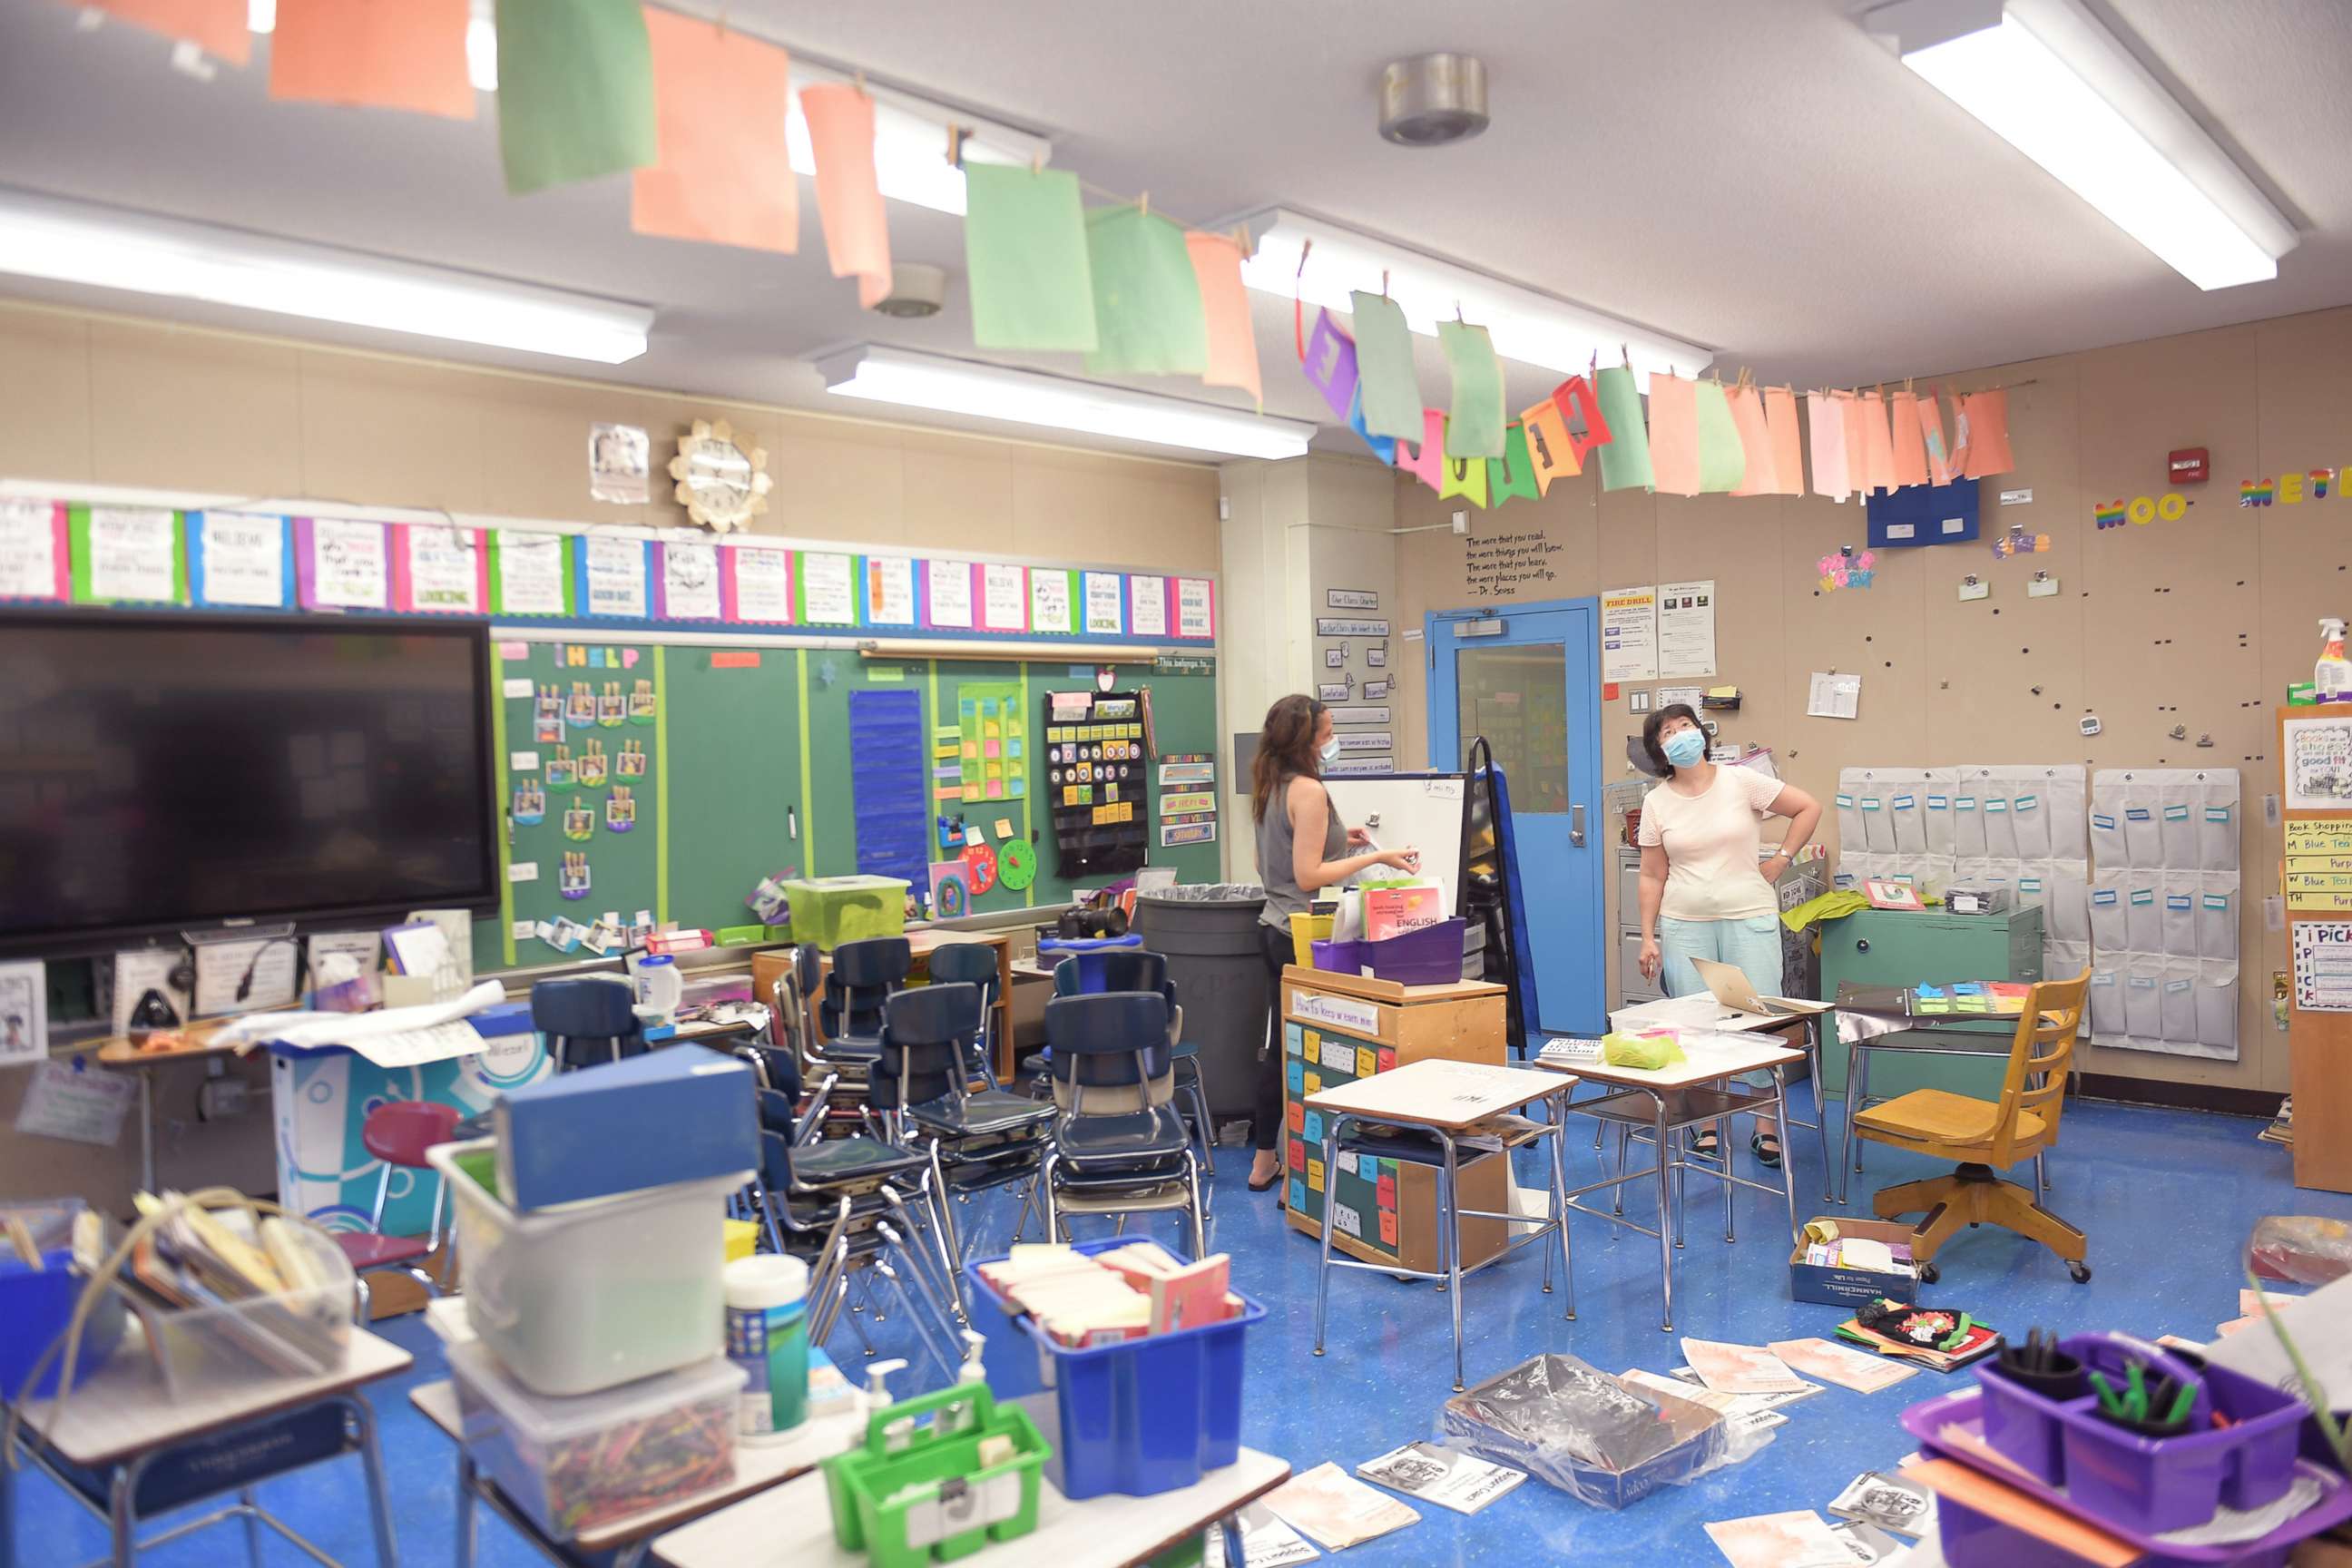 PHOTO: Teacher Marisa Wiezel and principal Alice Hom discuss plans for the school year in Wiezel's classroom at Yung Wing School P.S. 124 in New York, Aug. 25, 2020.